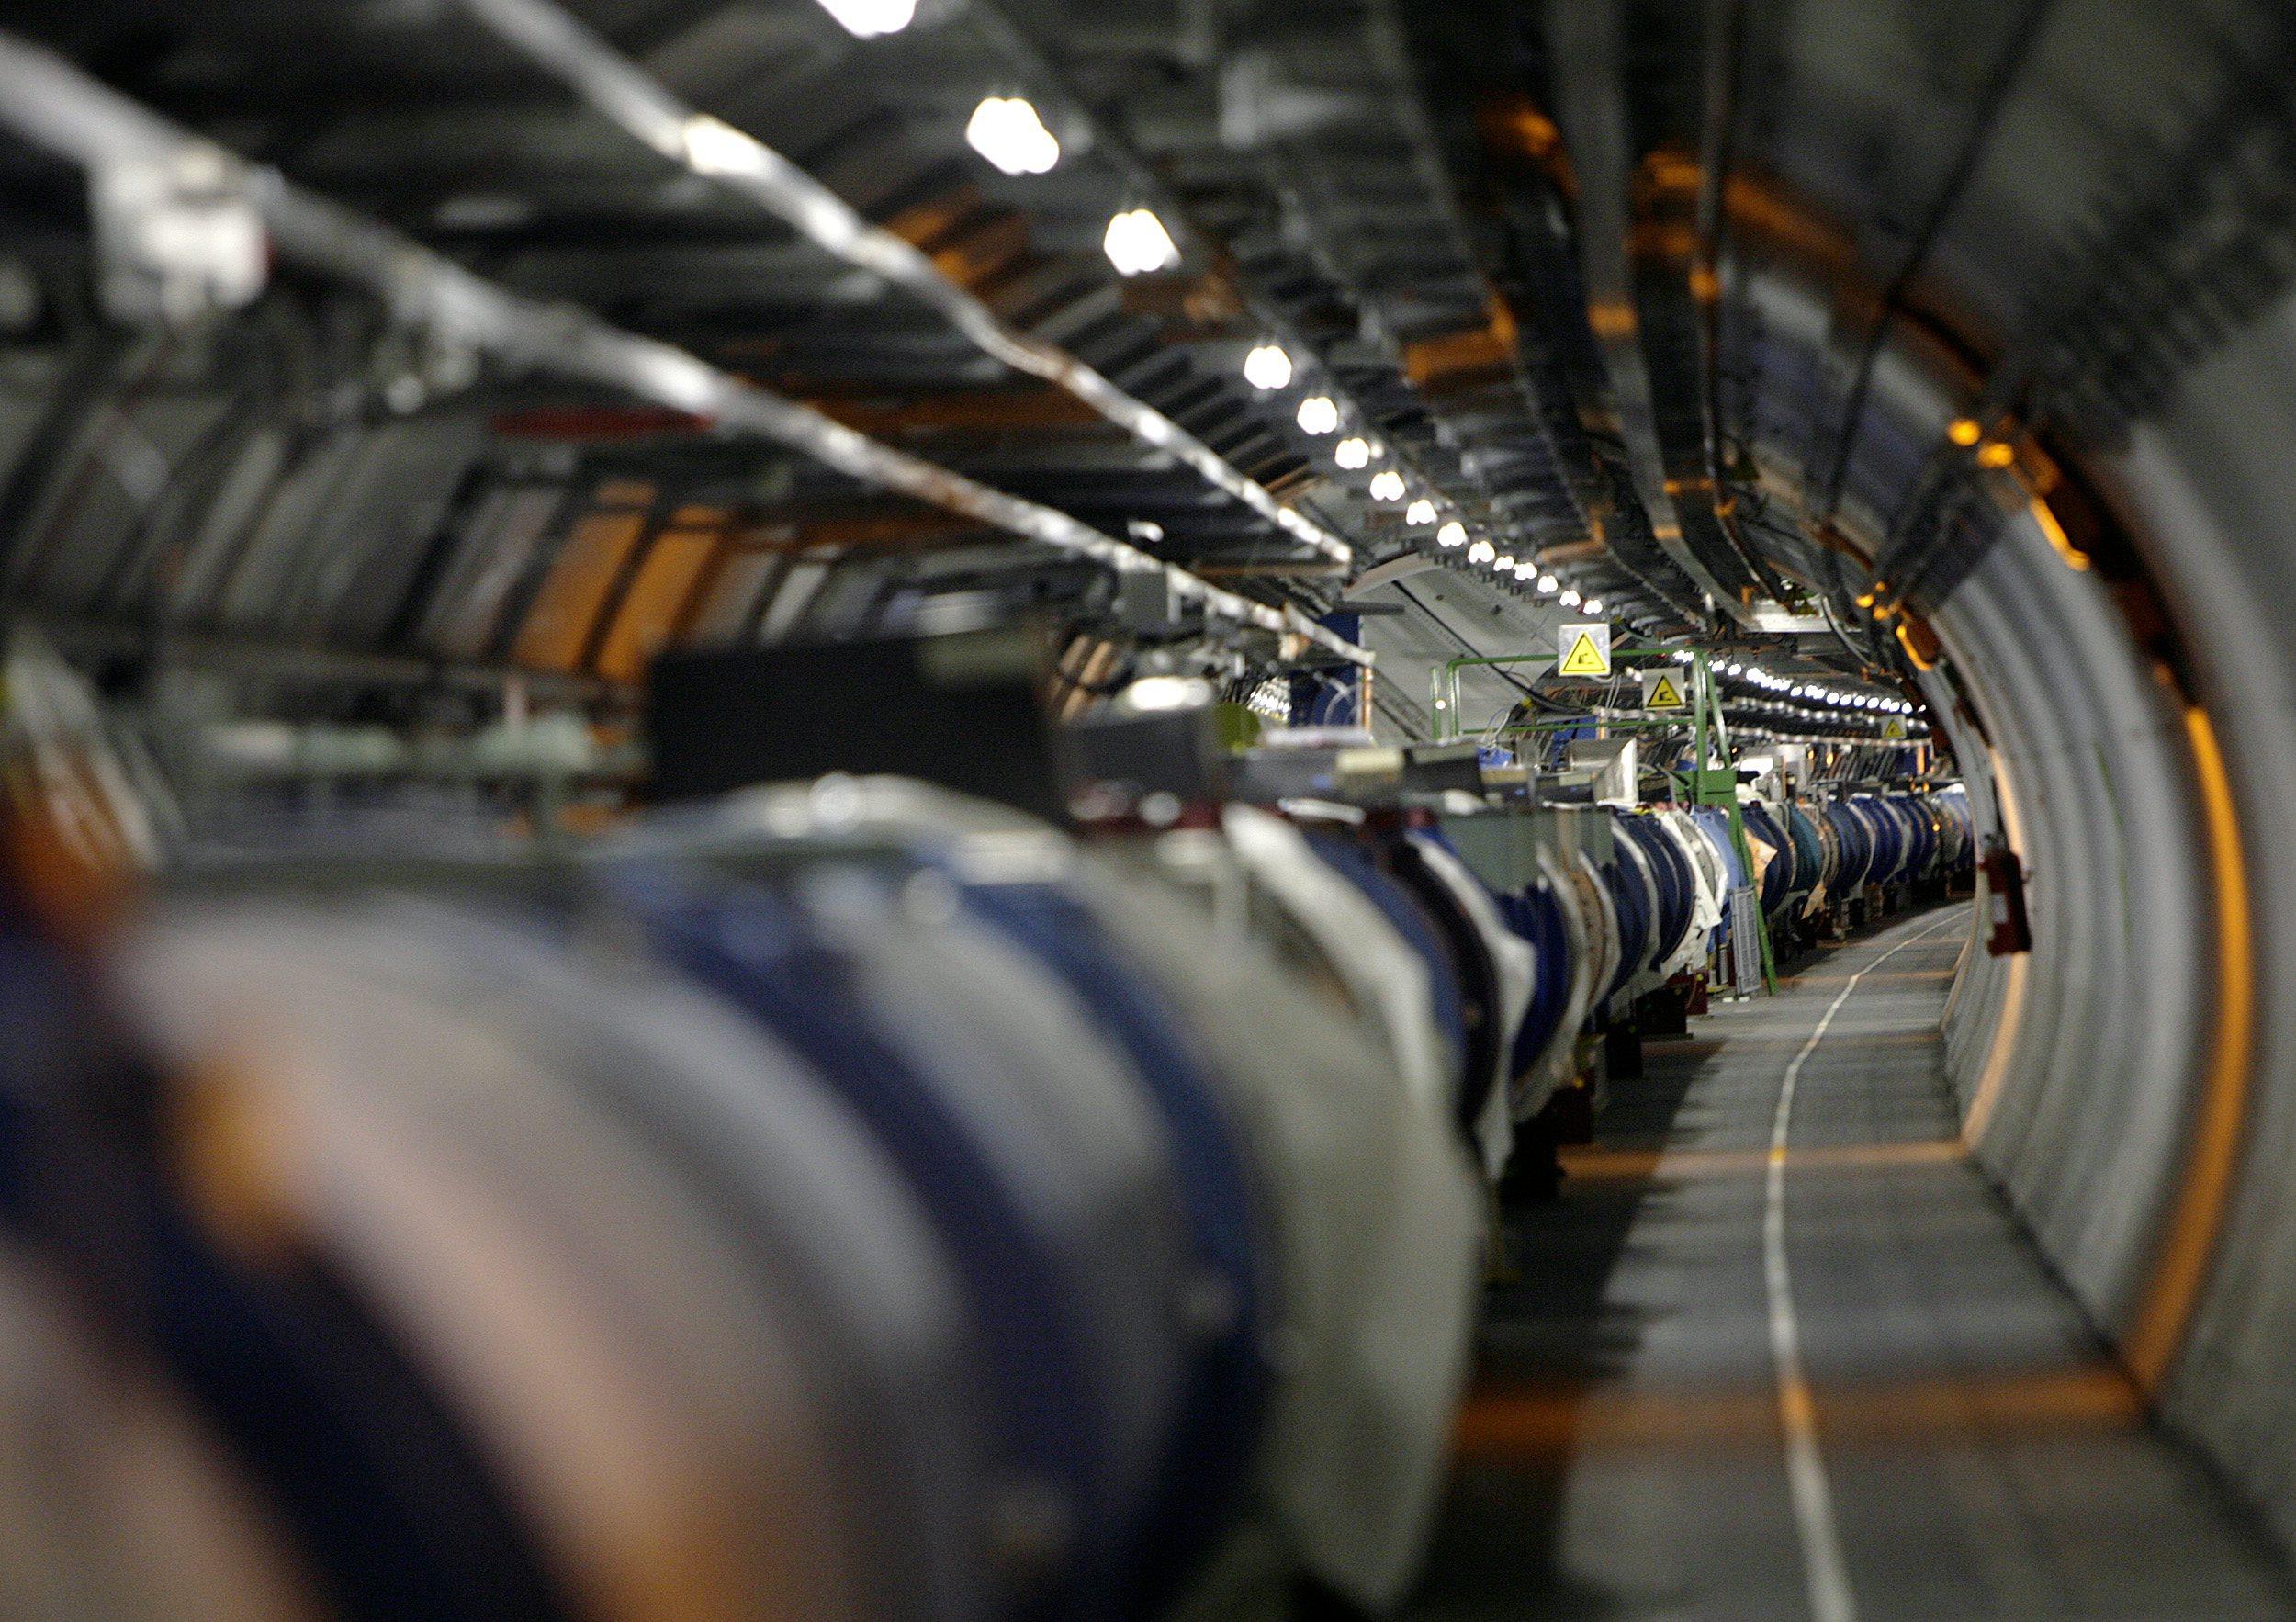 The CERN president has weighed in on the debate around China’s proposed particle accelerator which would dwarf Europe’s Large Hadron Collider (pictured). Photo: Keystone via AP